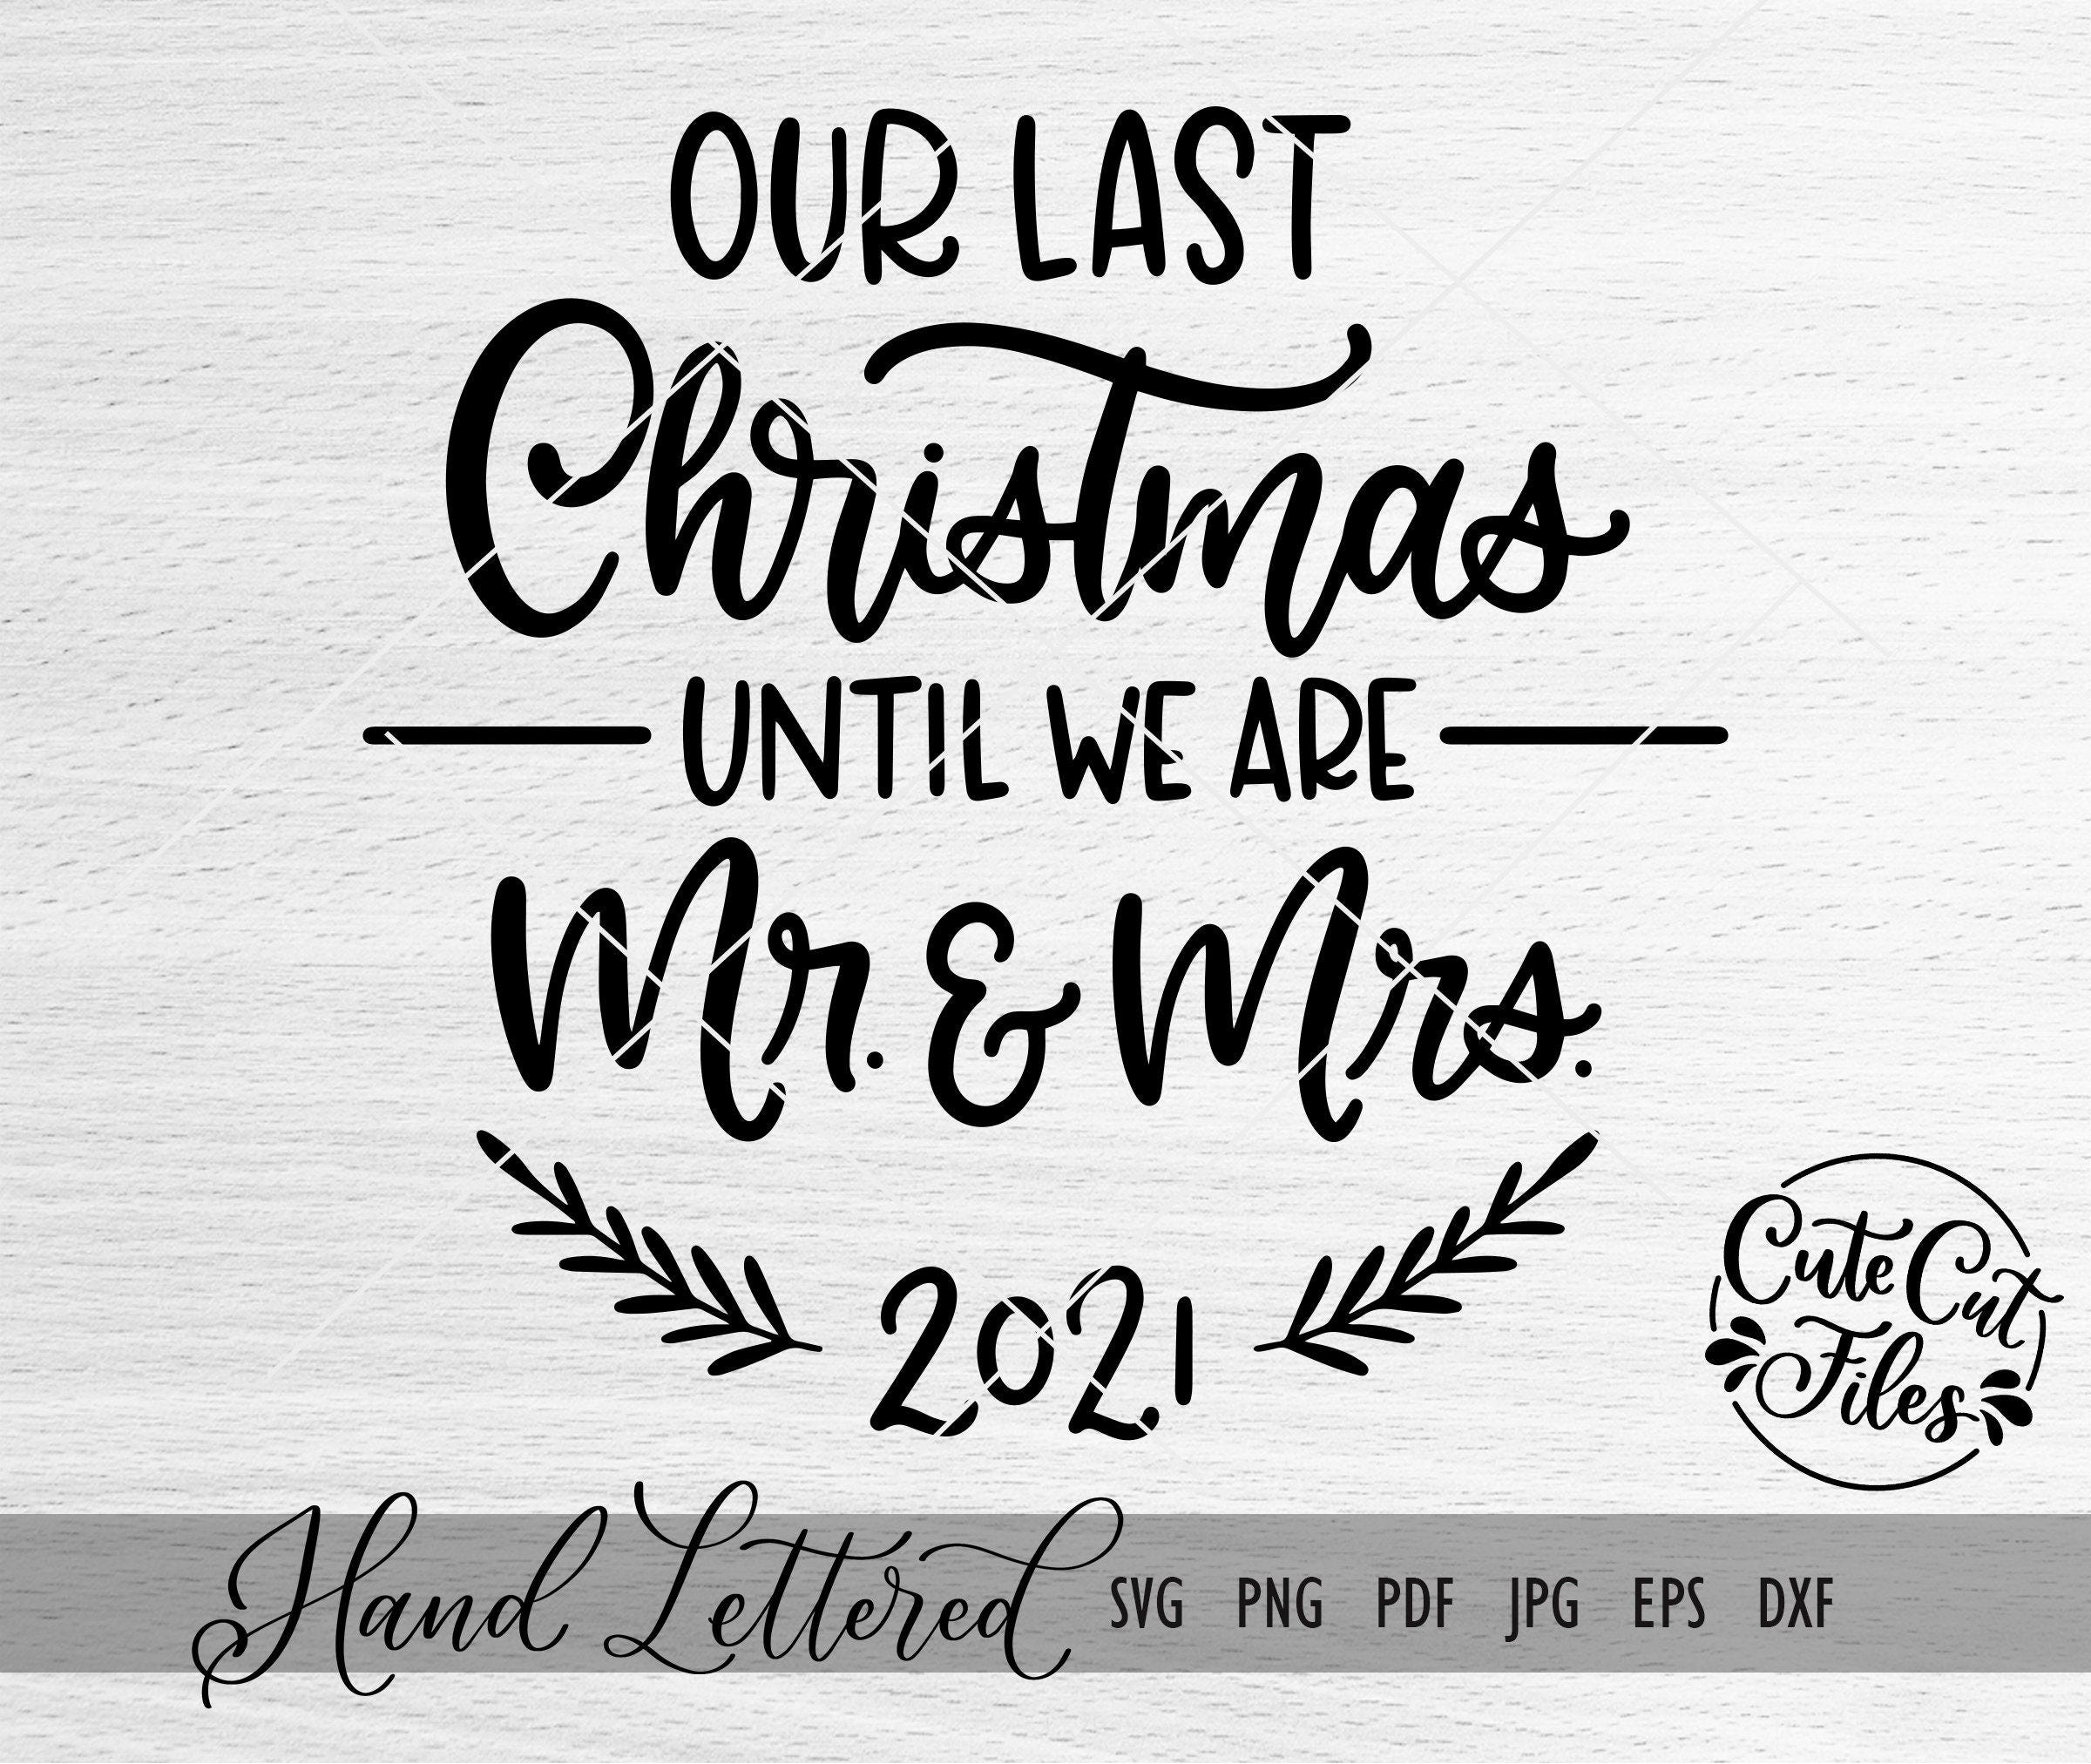 Engaged 2021 SVG PNG DXF | Our Last Christmas Until We Are Mr. and Mrs. svg | Getting Married svg png dxf | Engaged Christmas Ornament svg